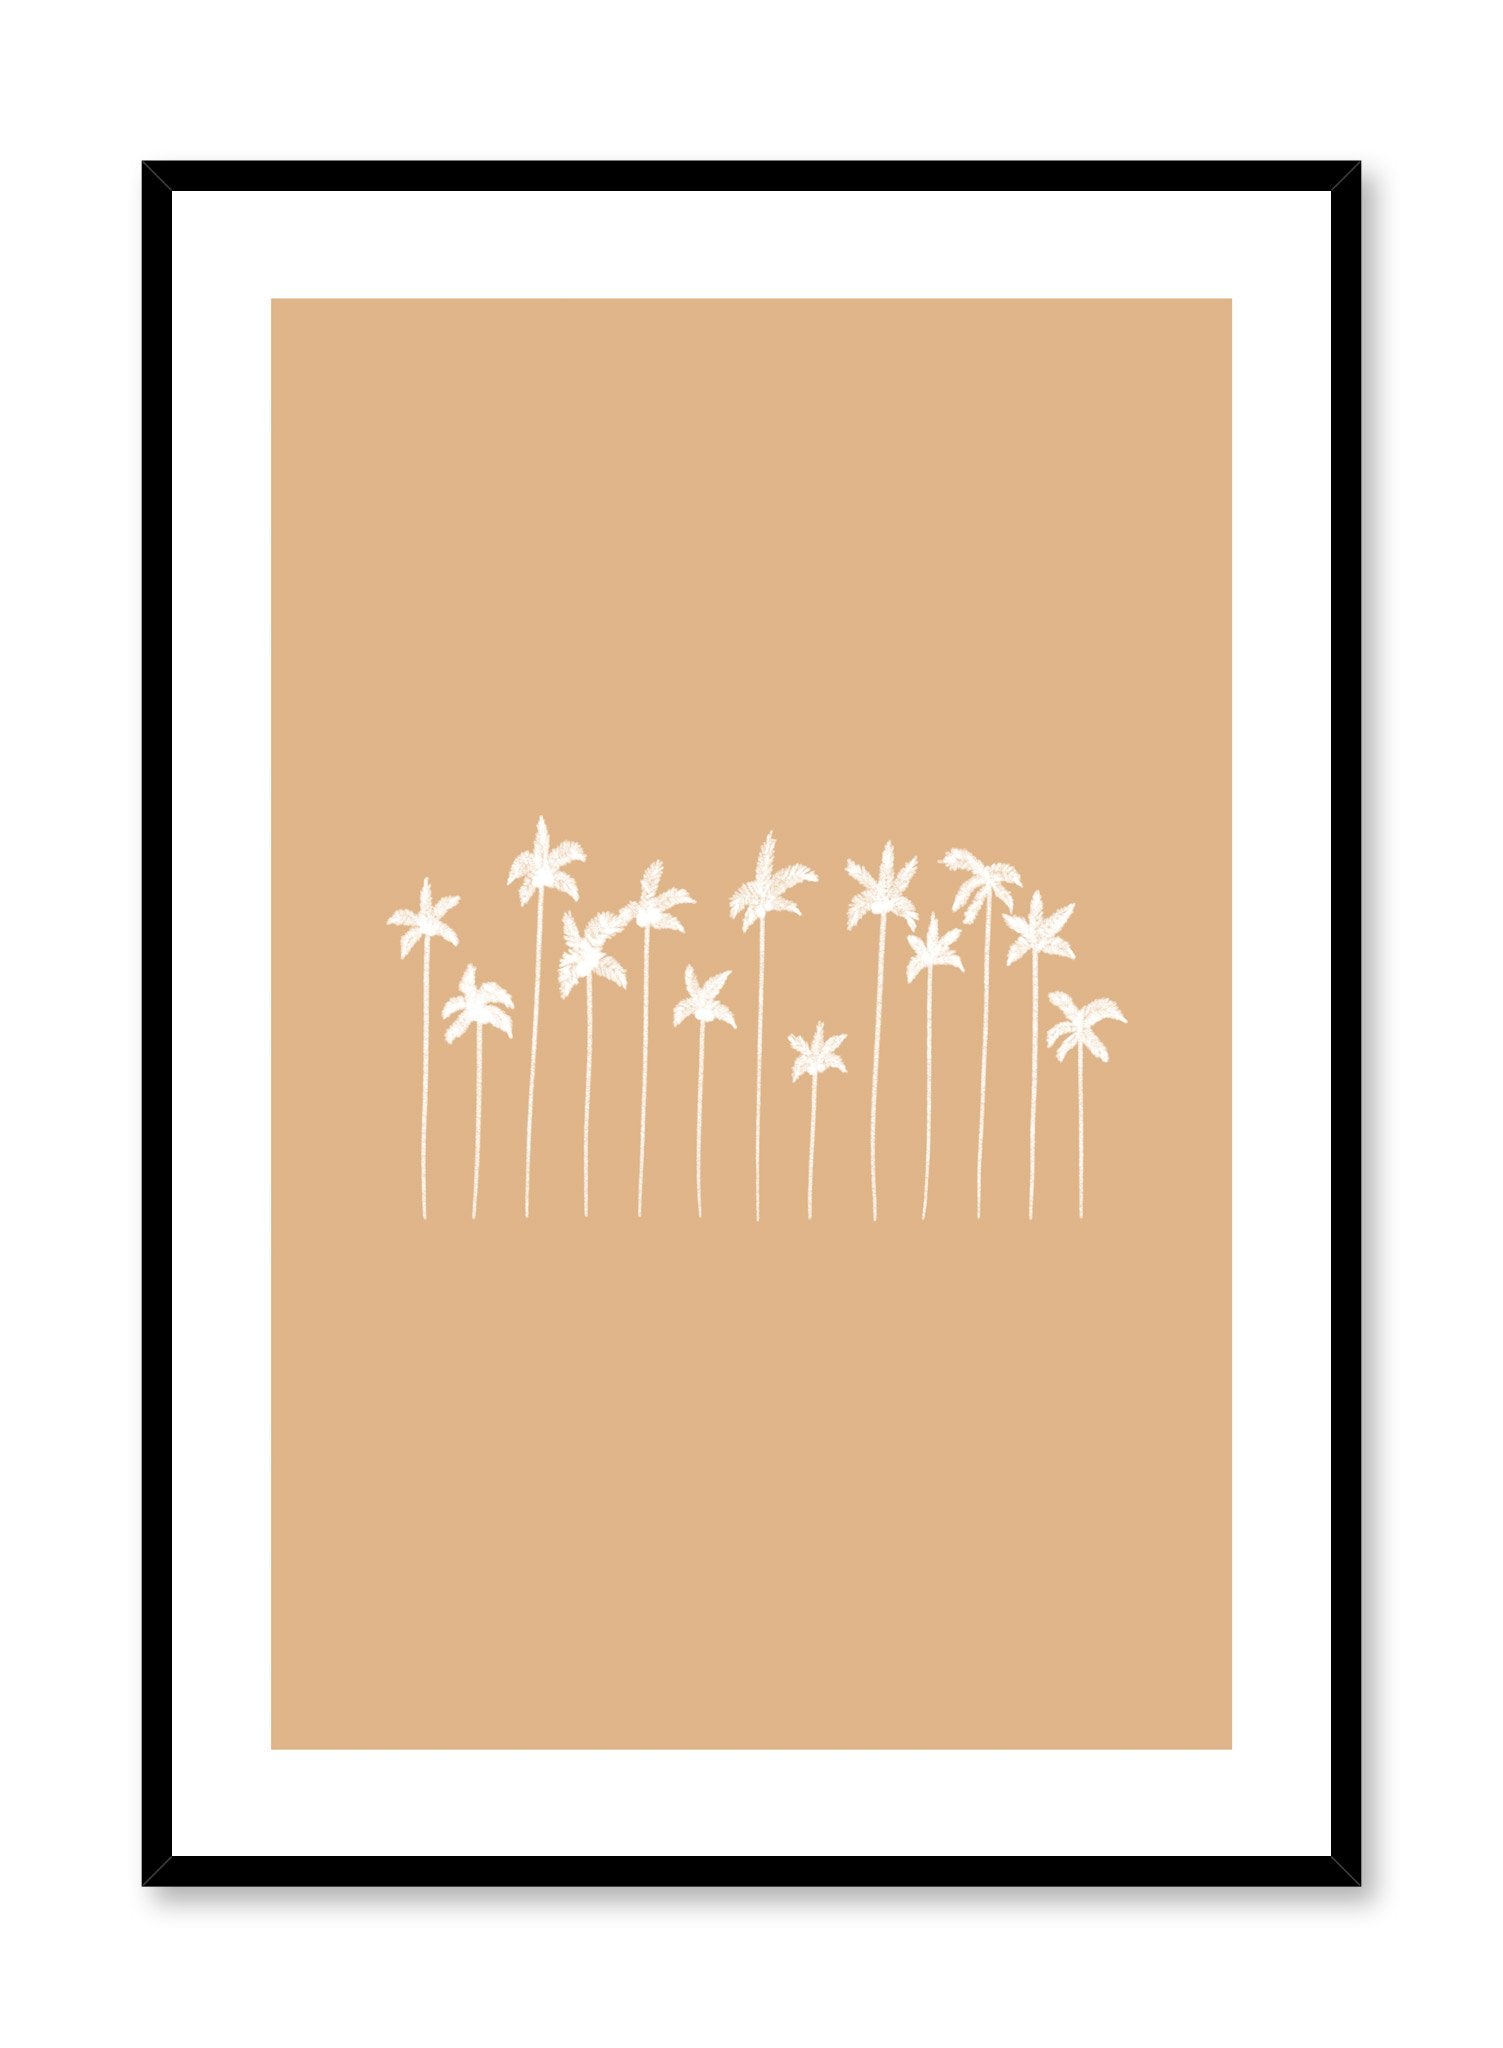 Modern minimalist illustration poster with white palm trees on beige background